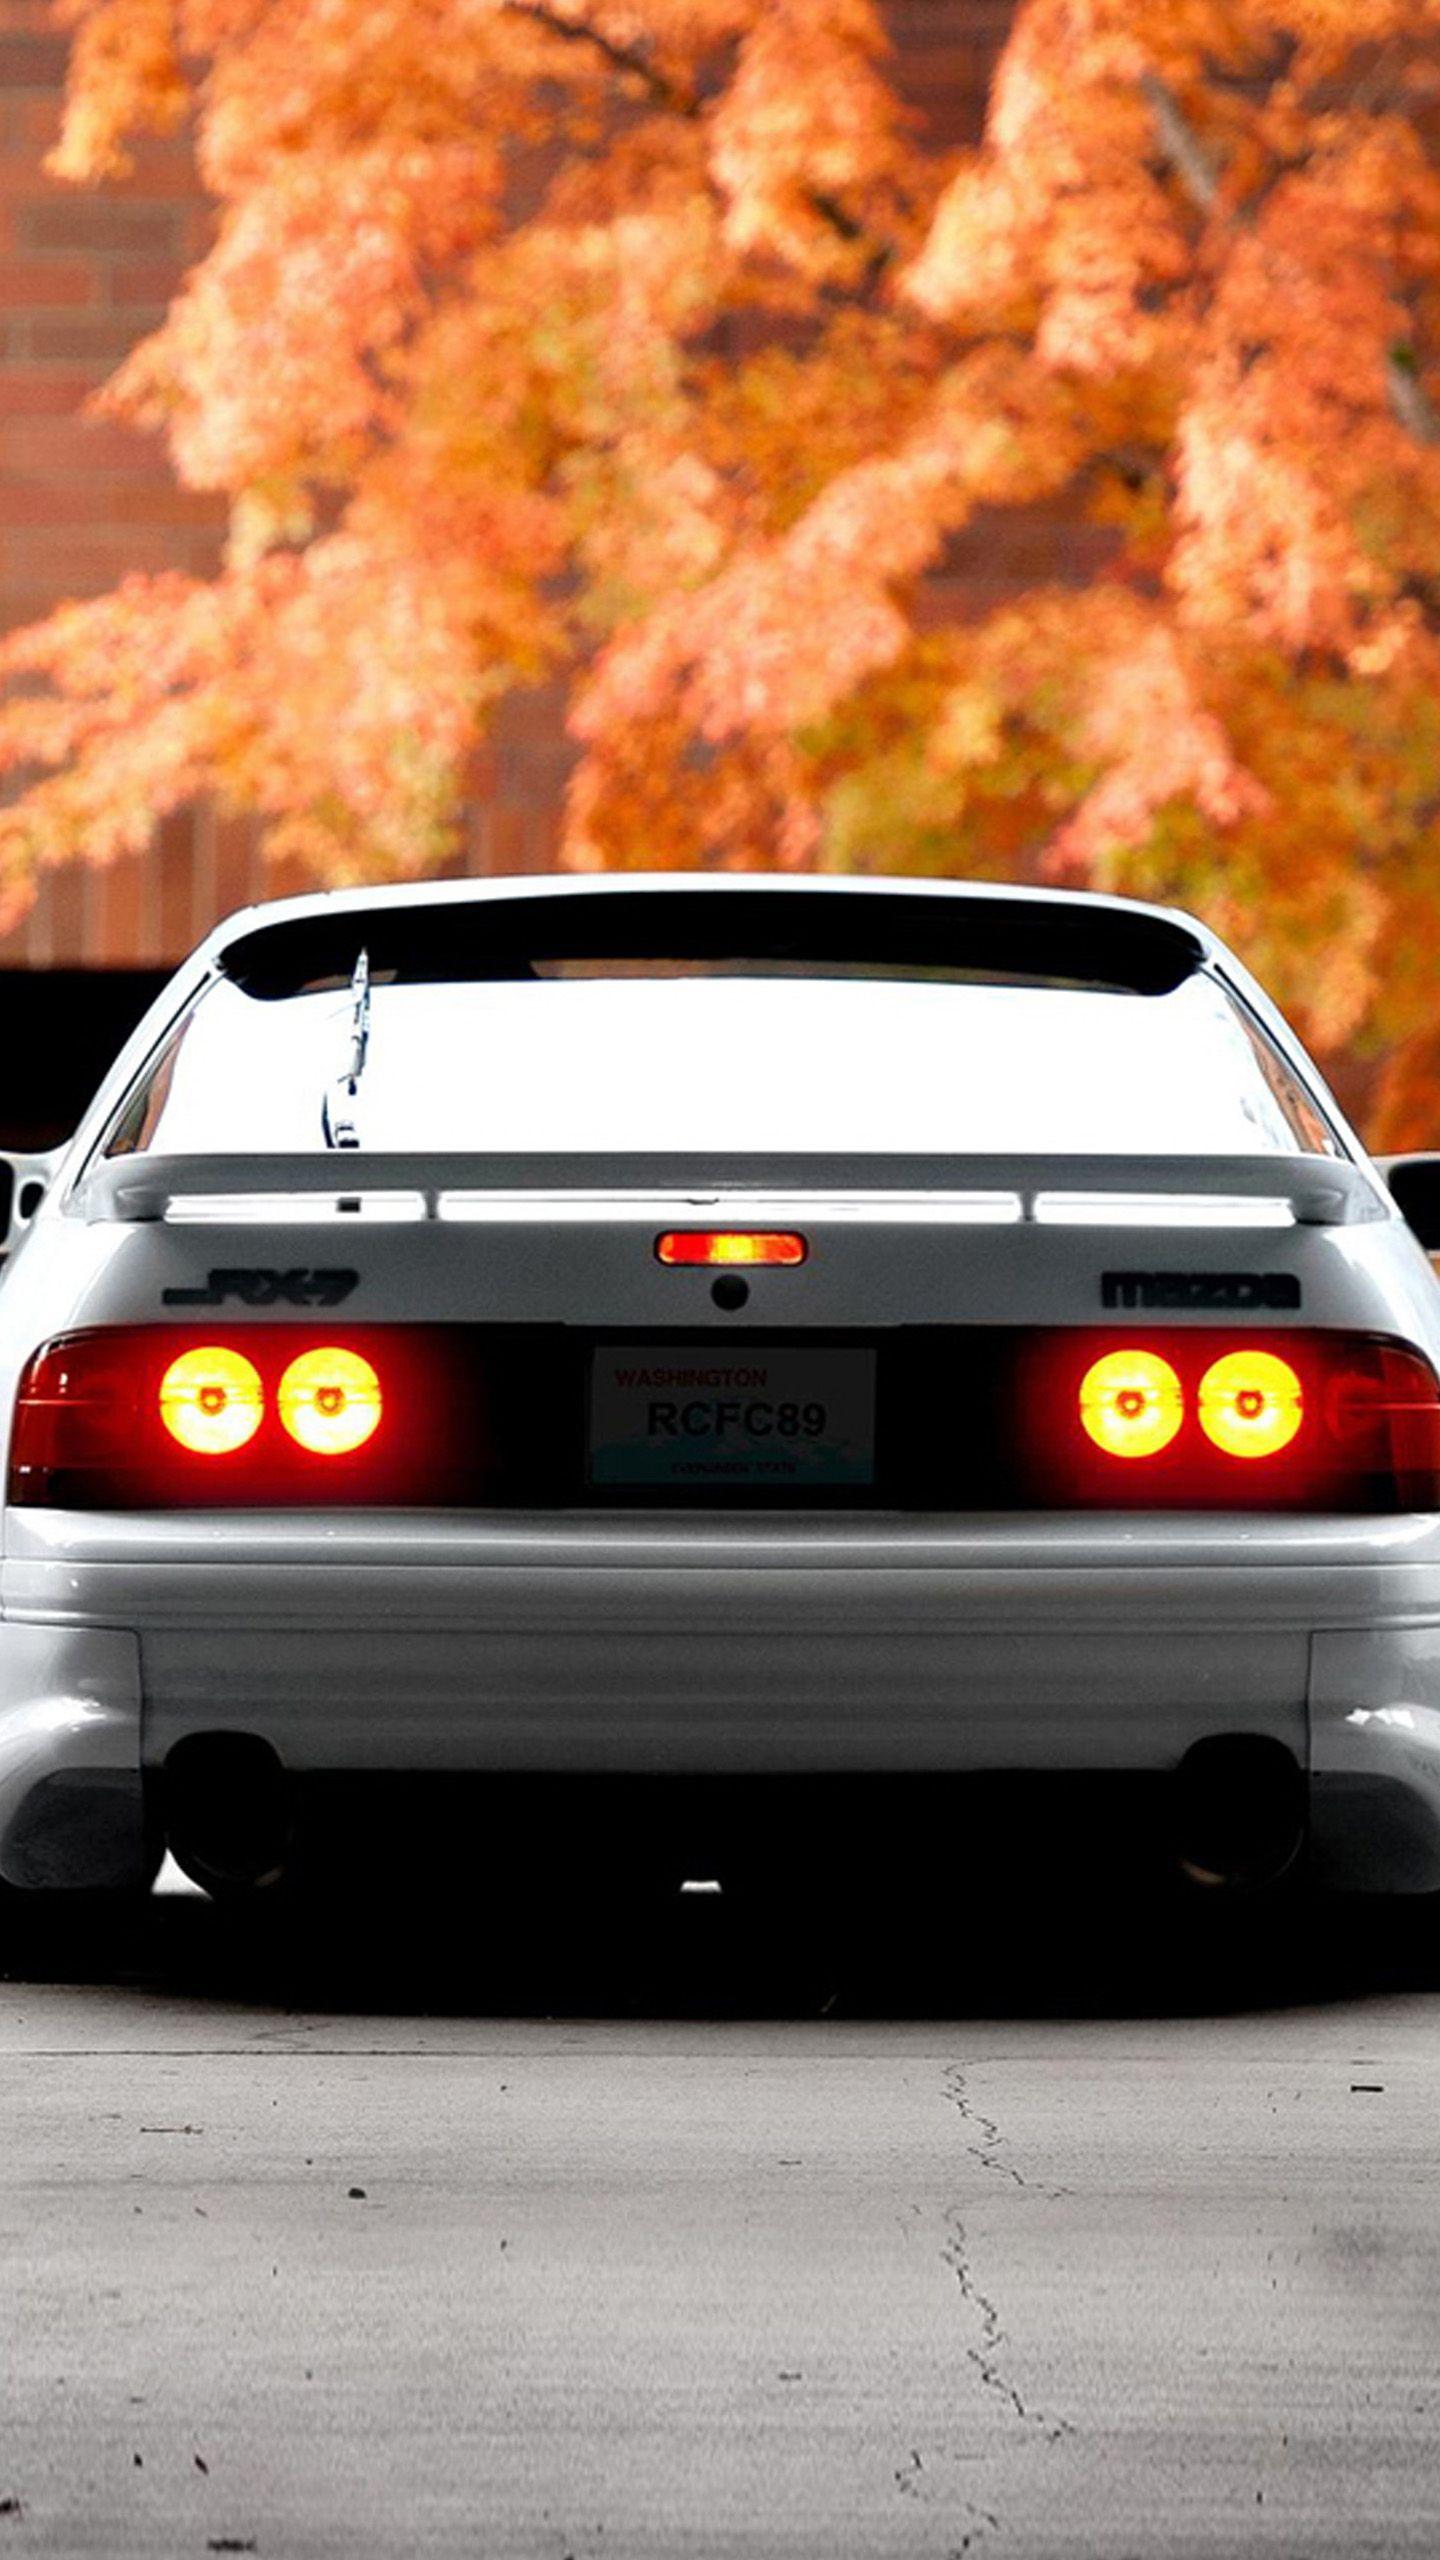 RX7 Car Wallpaper for iPhone